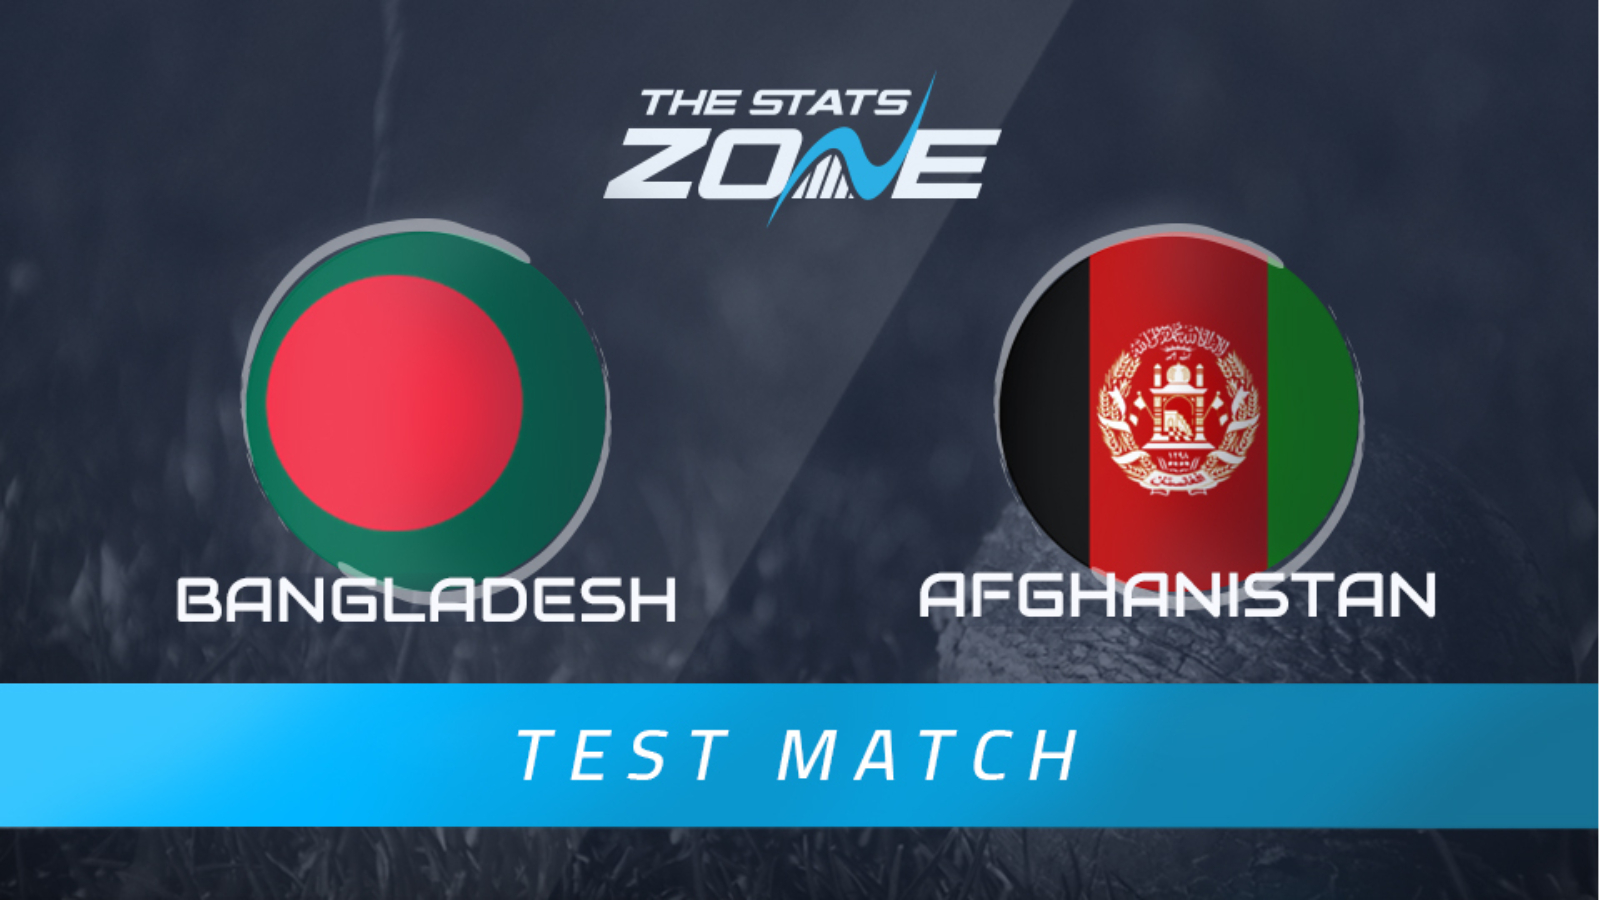 Bangladesh vs Afghanistan Test Match Preview & Prediction The Stats